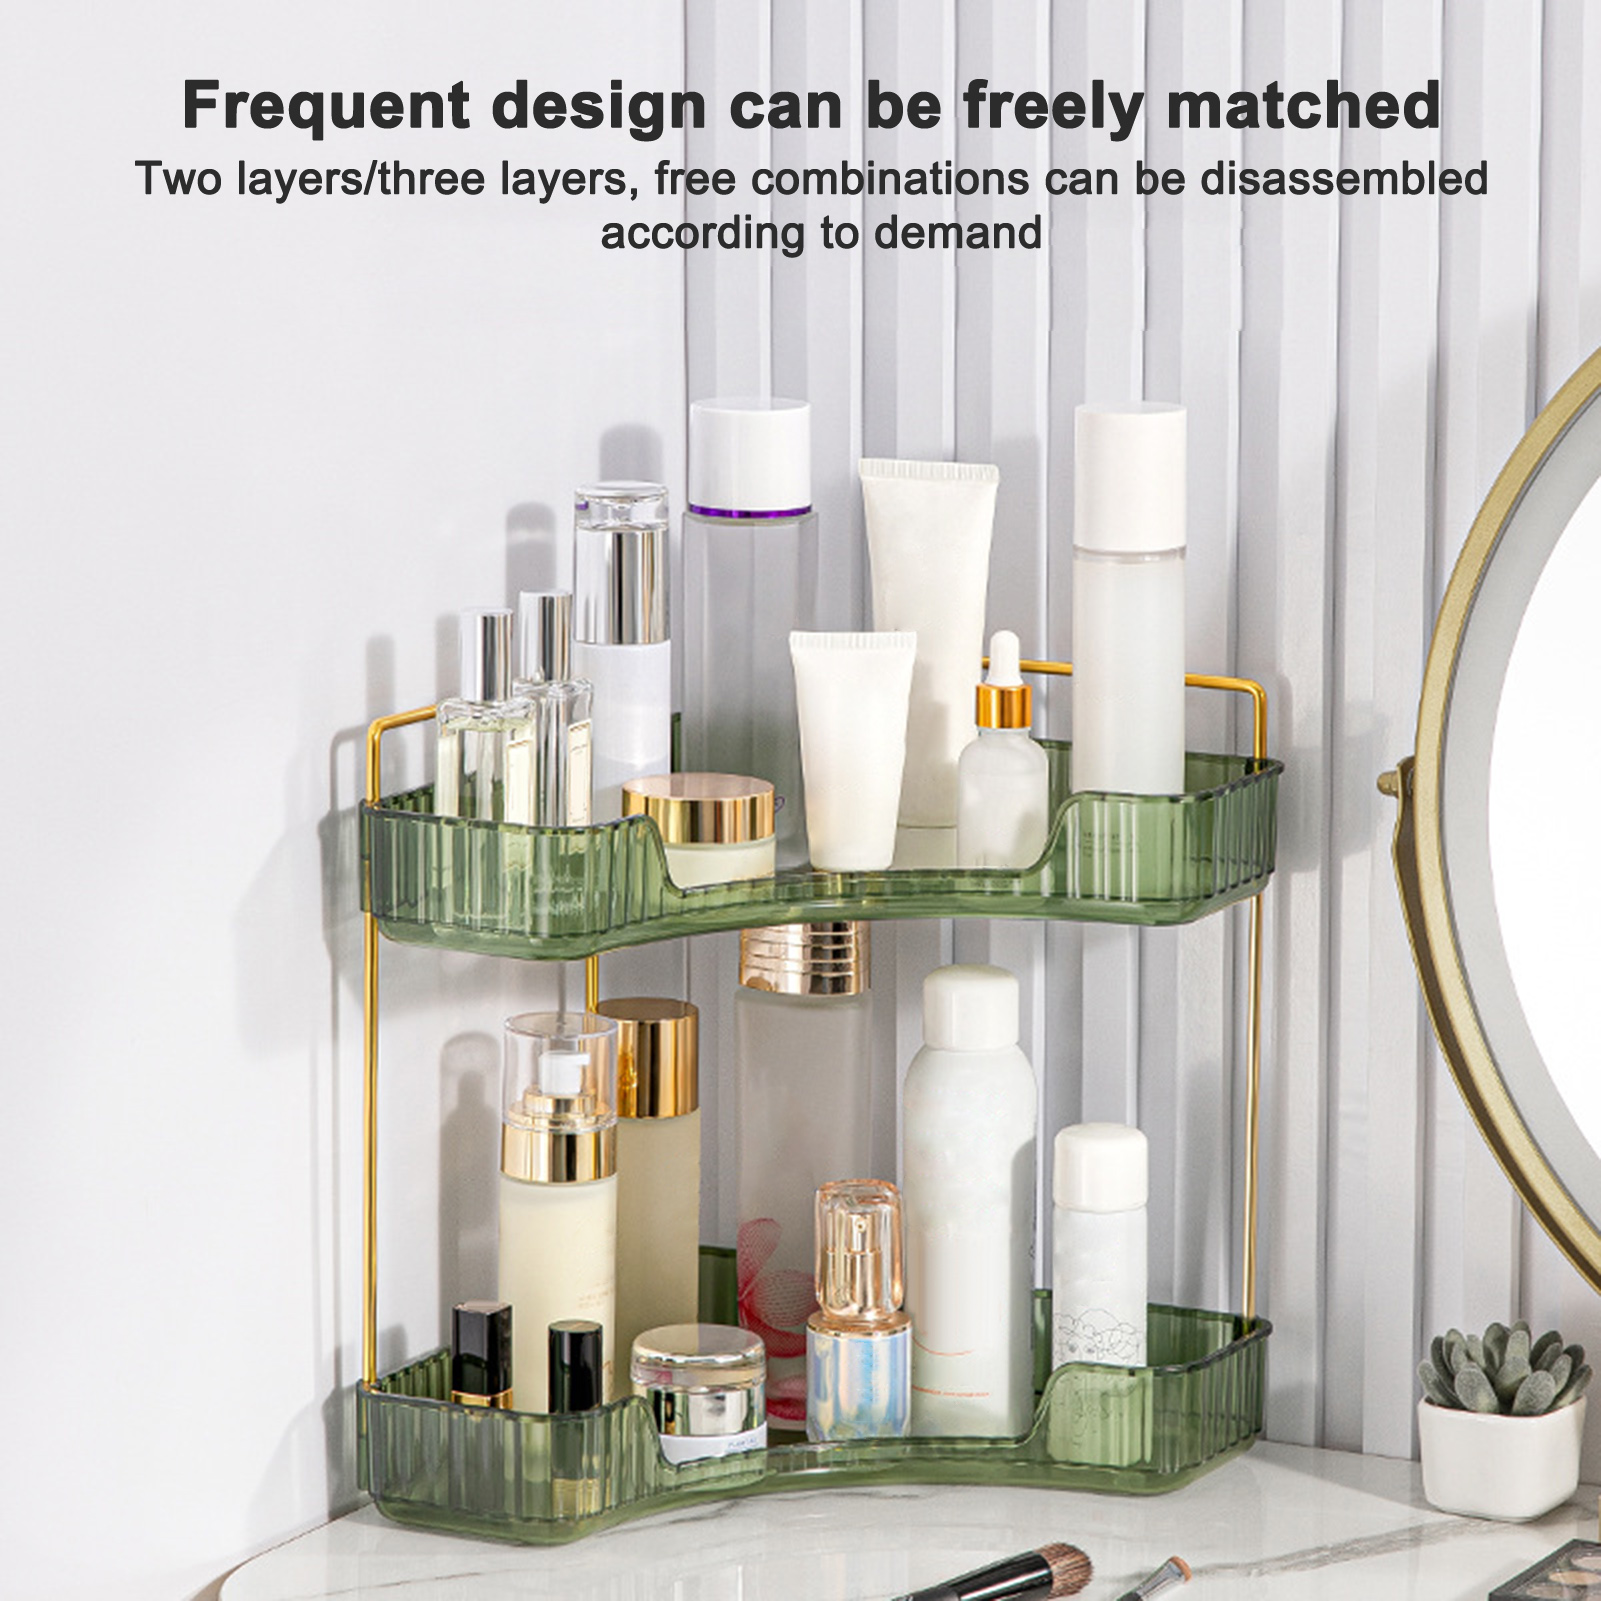 JAREDQ Counter Organizer Shelf Bathroom Rack 2-tier Corner Bathroom Storage Shelf Sturdy Makeup Organizer for Homes Ideal for Perfects Toilets and Home Supplies High Load bearing Capacity